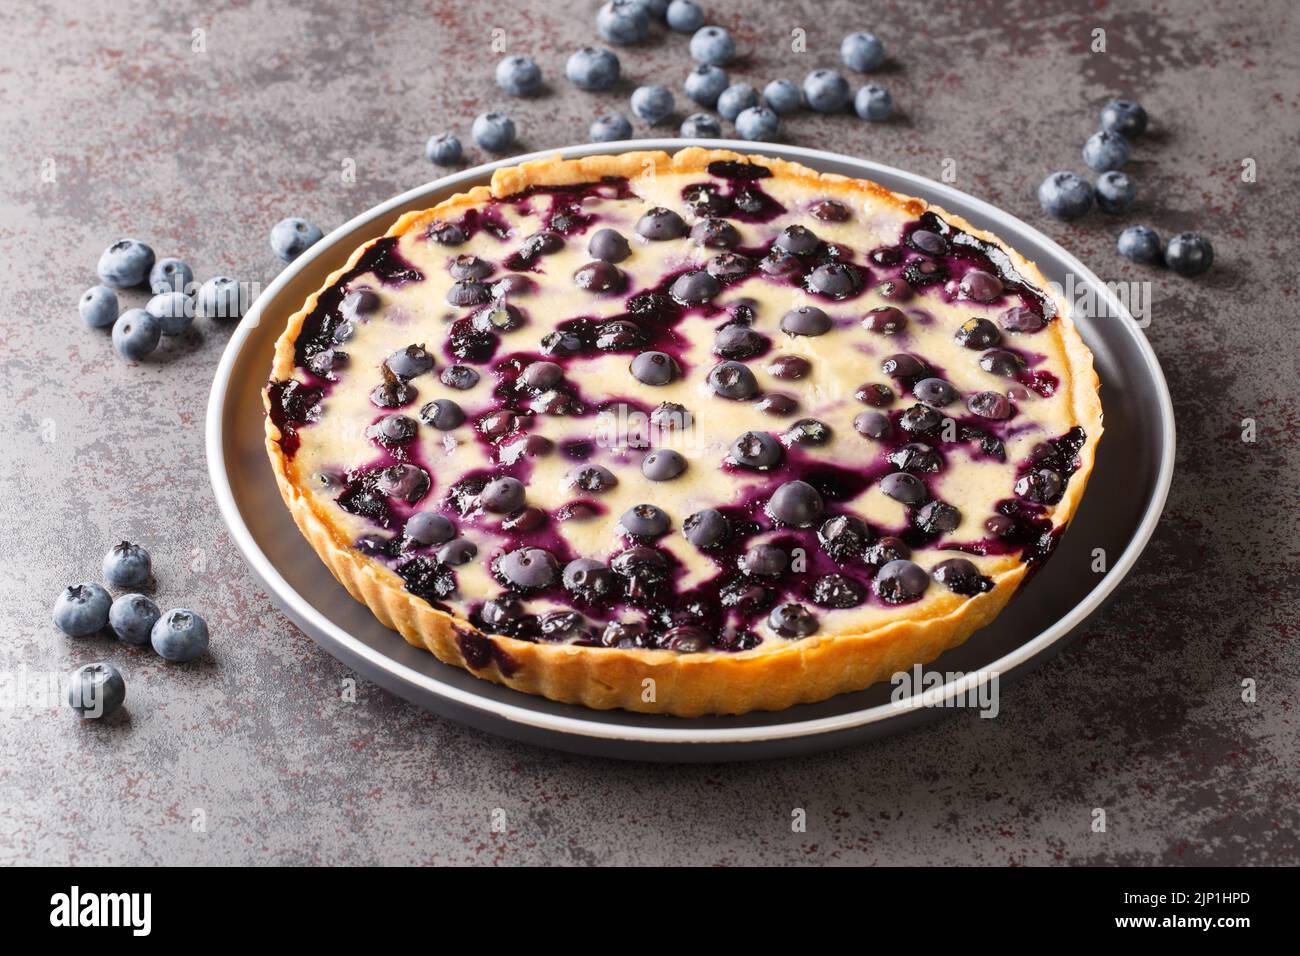 Delicious blueberry tart with custard and crispy crust close-up in a plate on the table. Horizontal Stock Photo